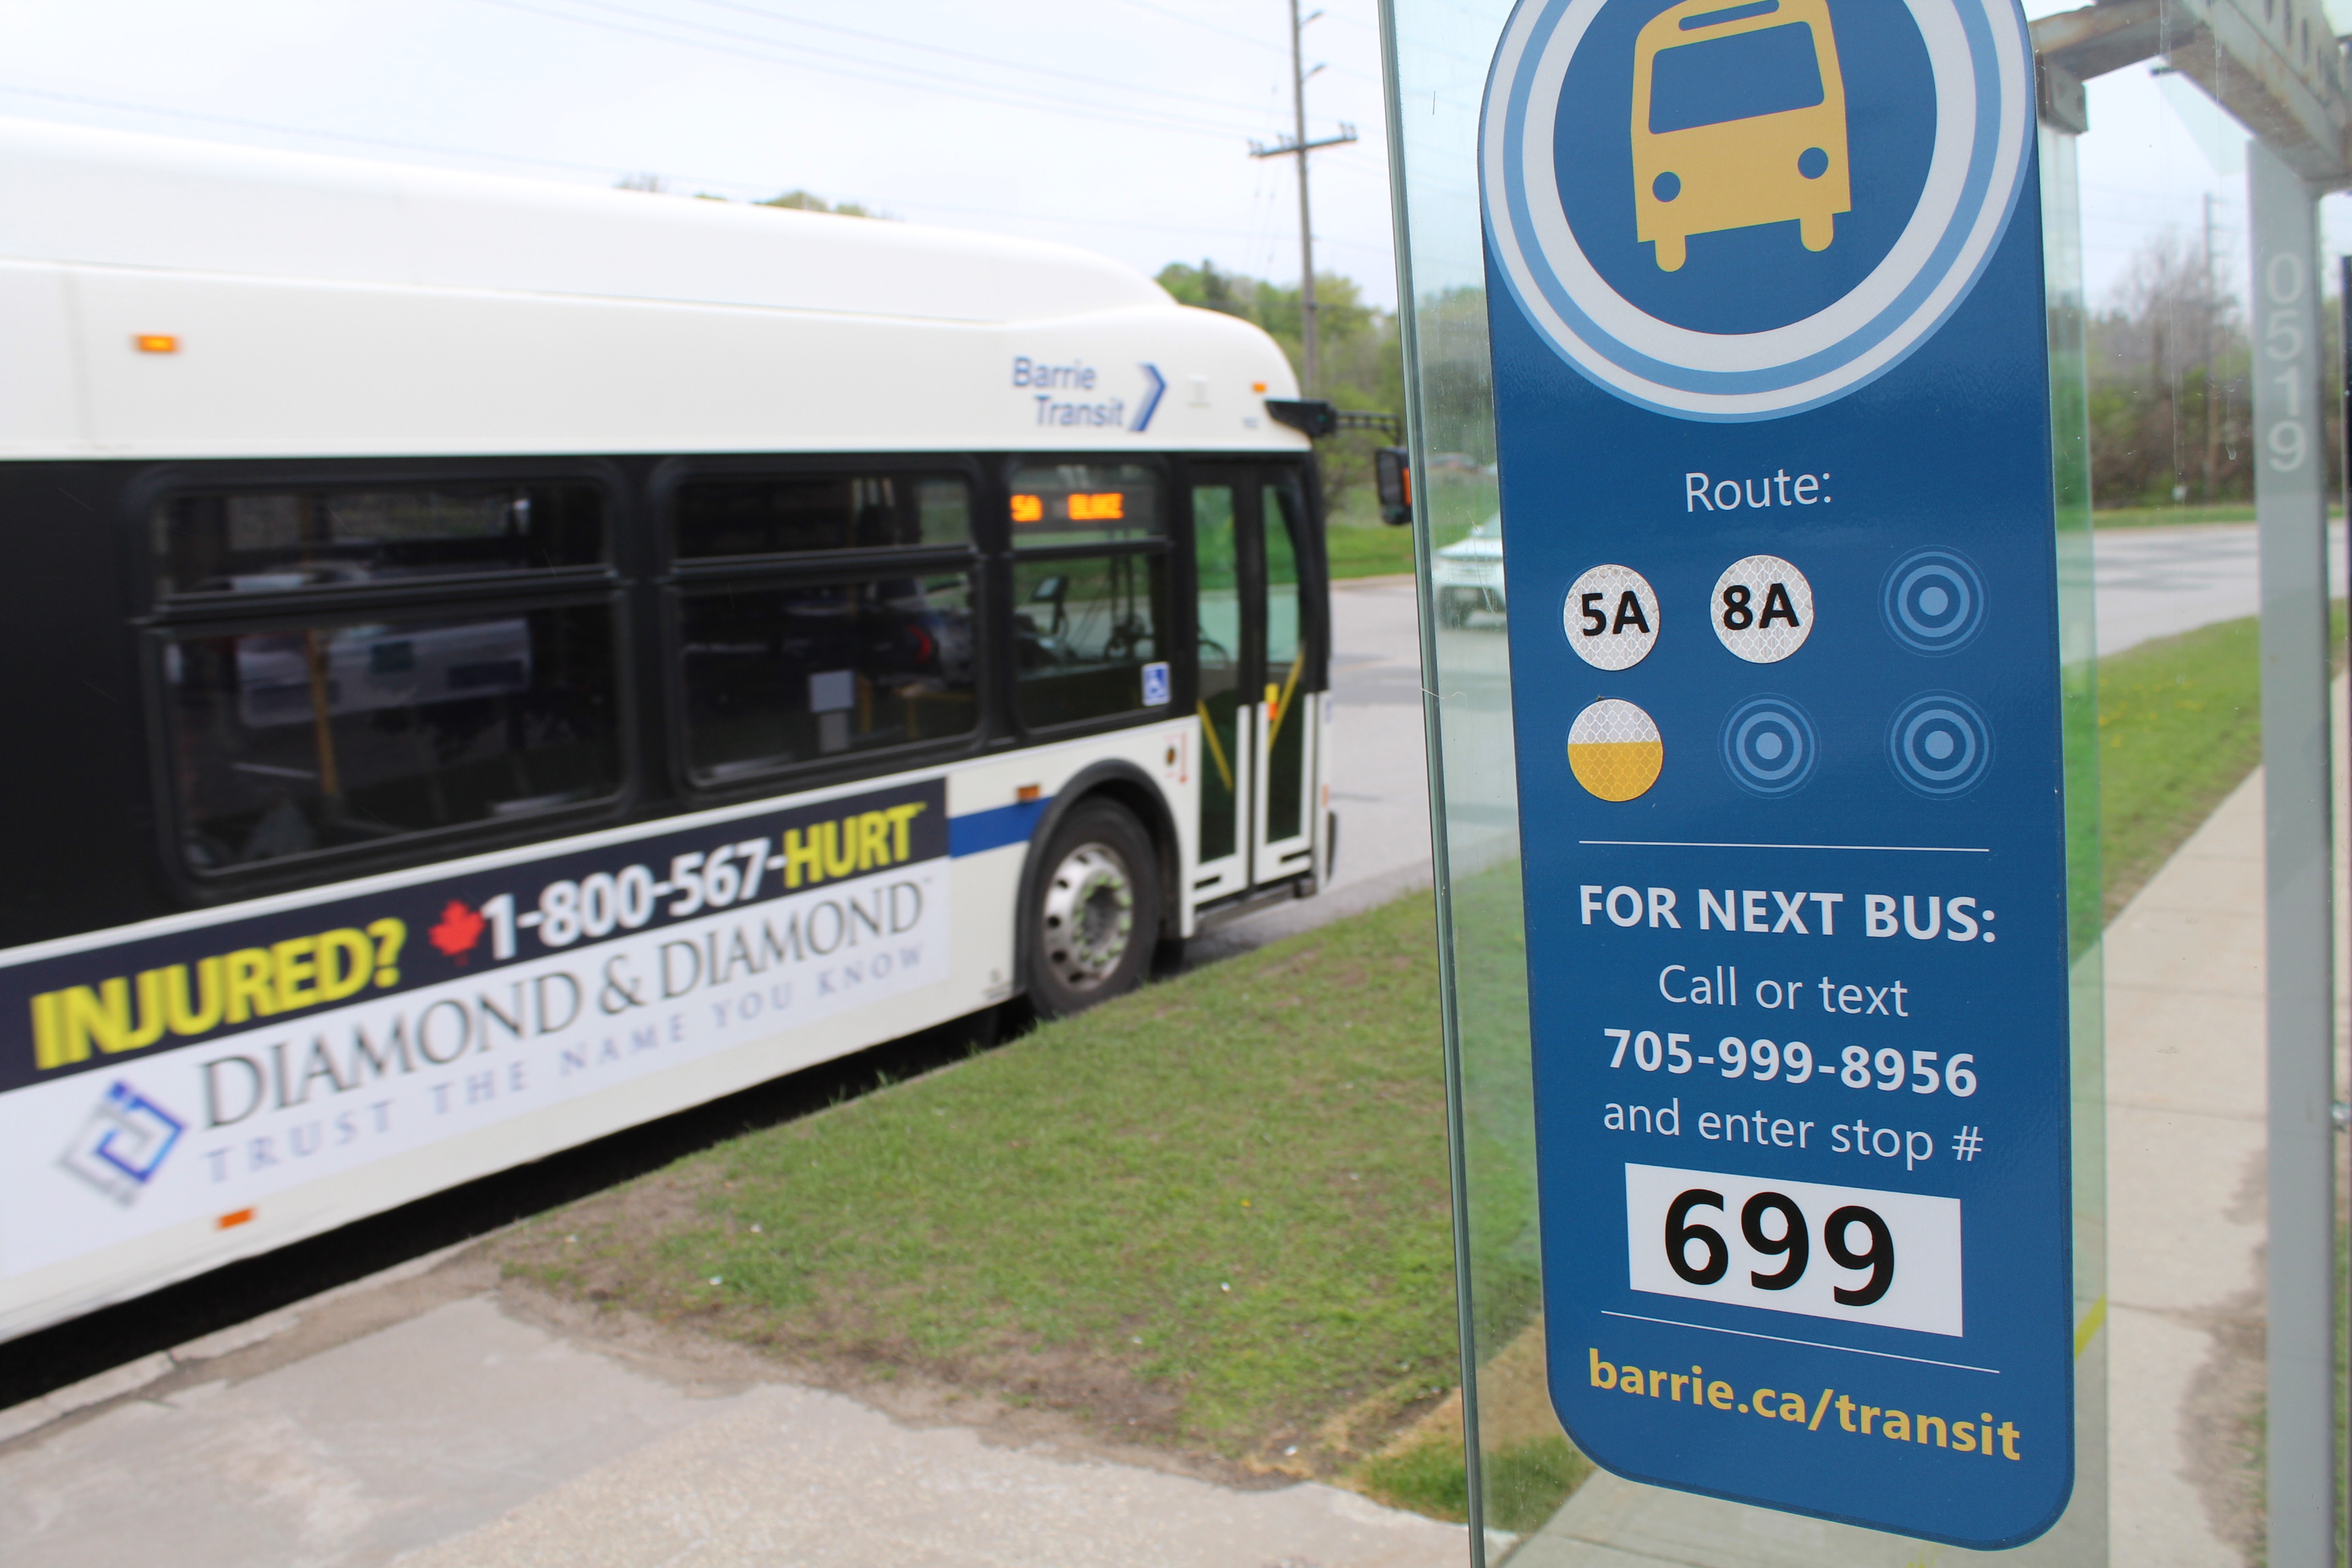 Come mid July, Barrie Transit users may be paying to ride again